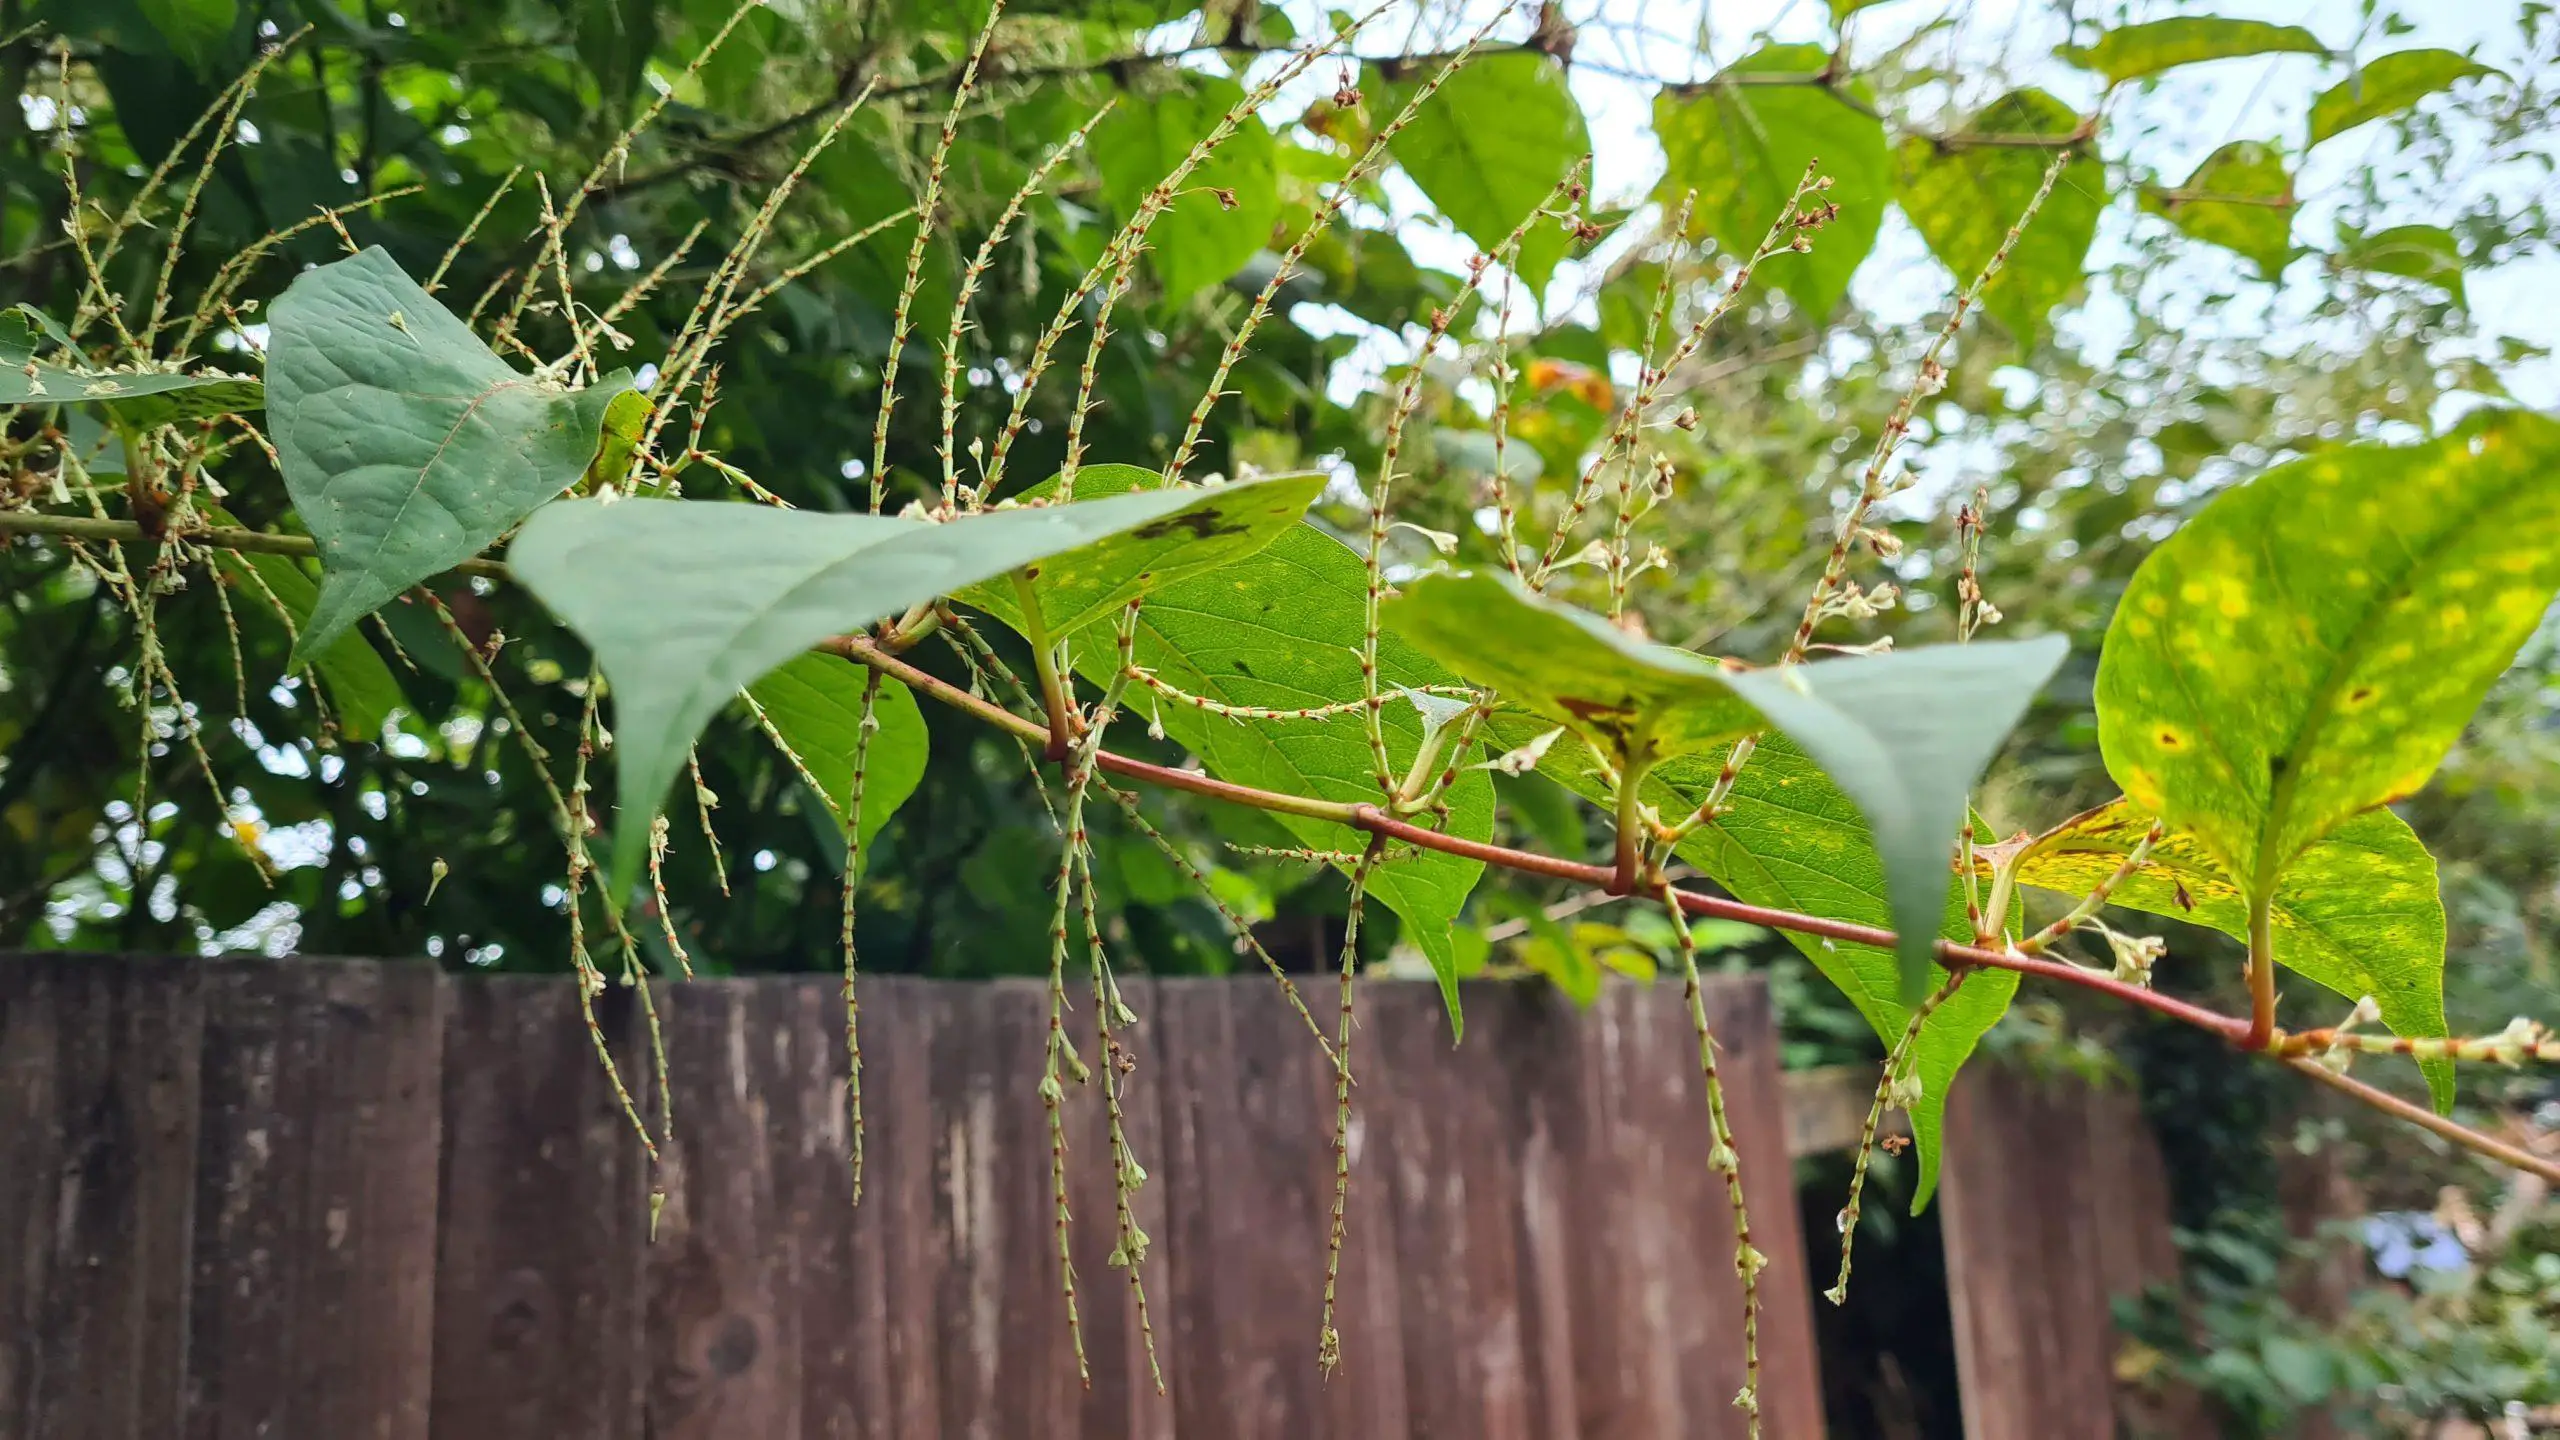 How much does Japanese knotweed cost to remove from your property scaled